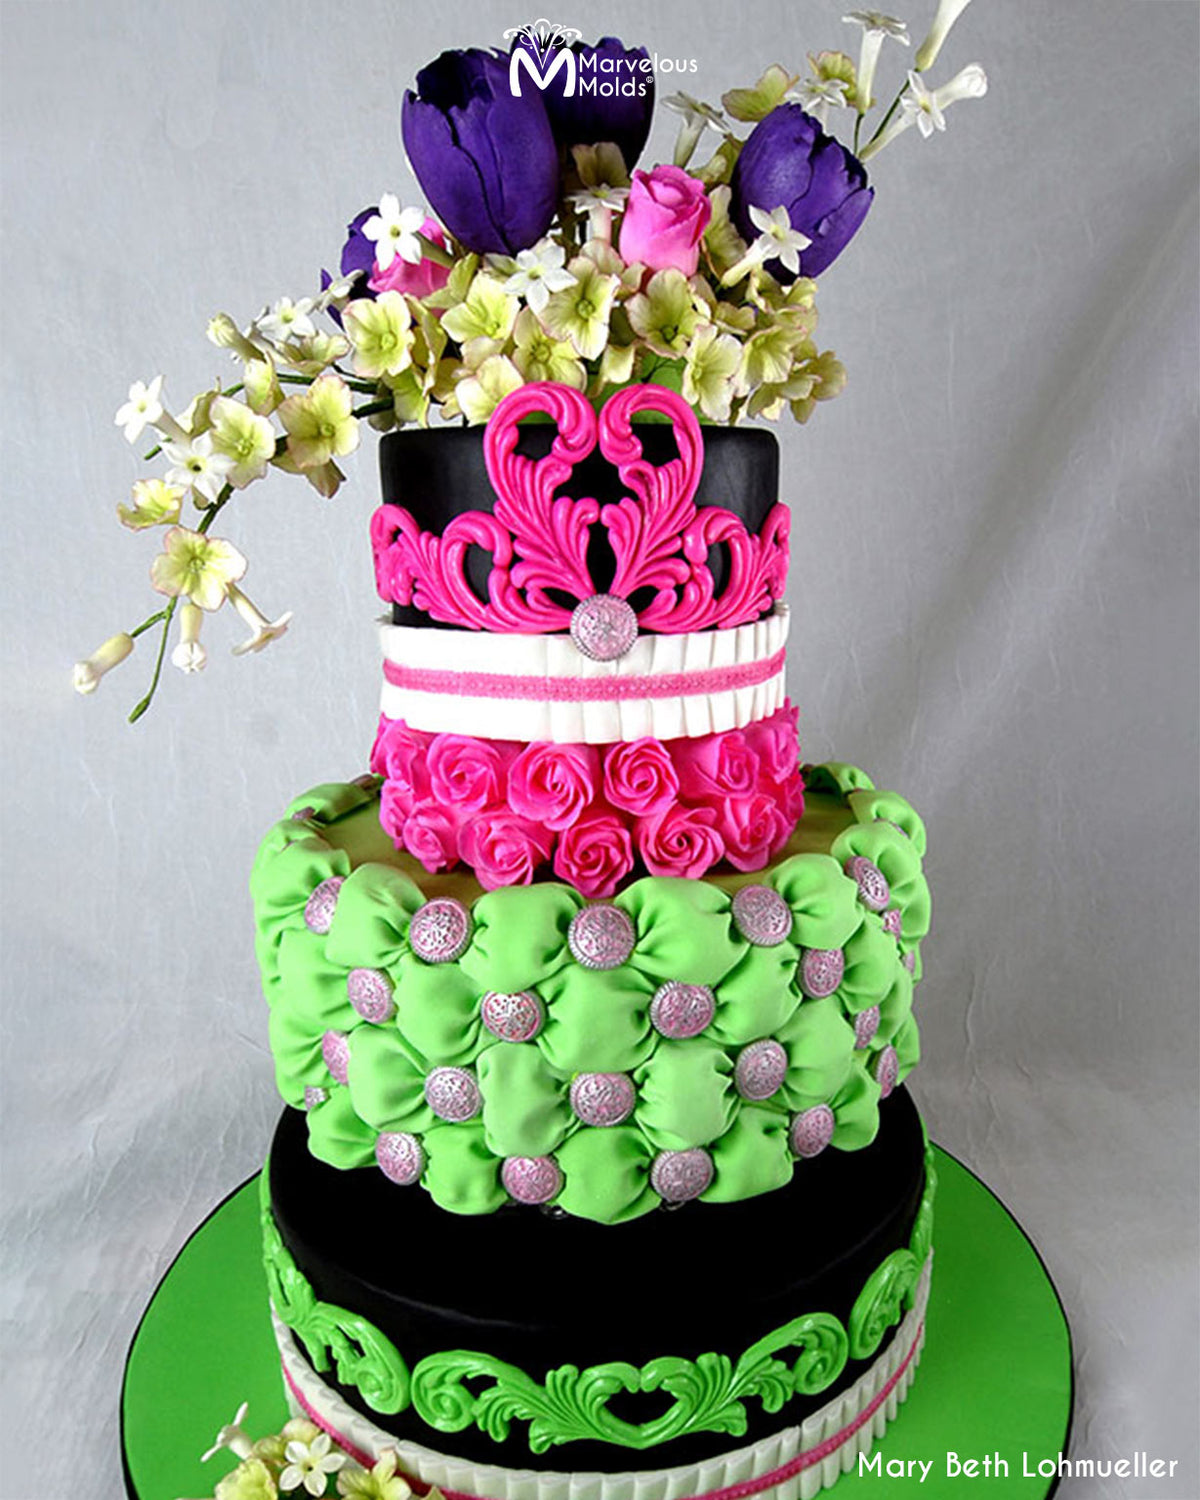 Colorful Cake Decorated with Marvelous Molds Filigree Button Silicone Mold and Tufted Designs